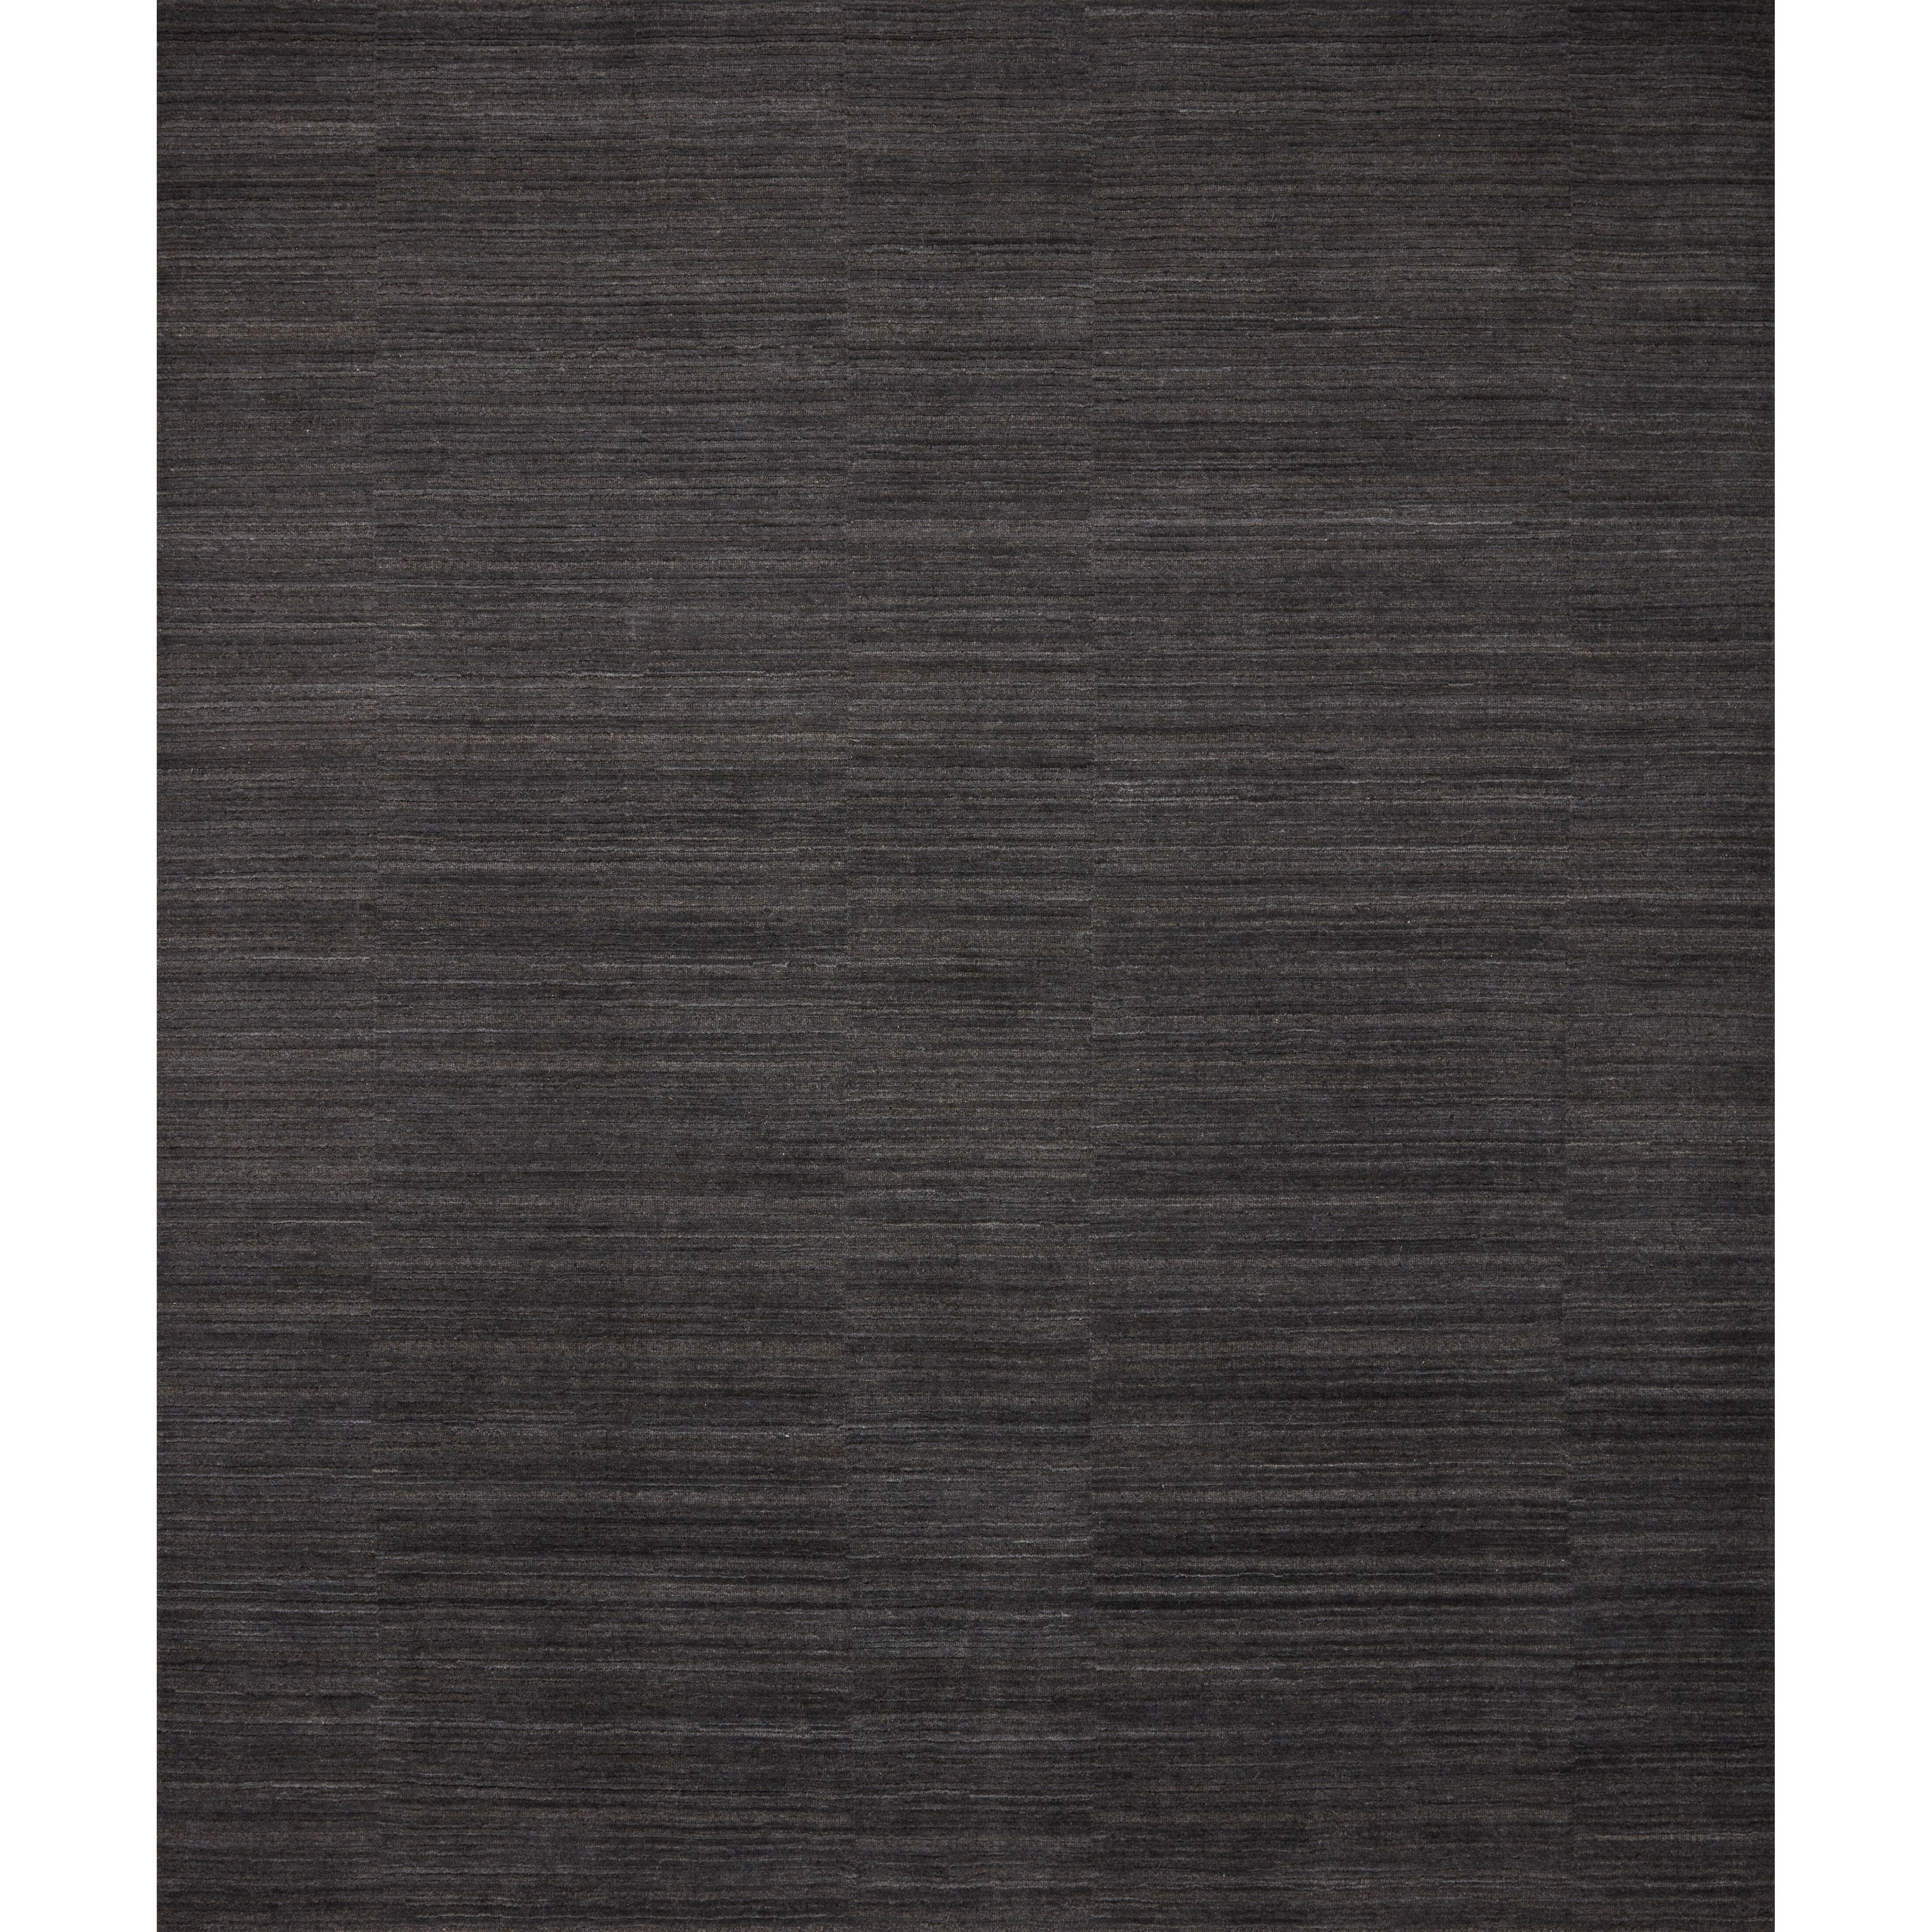 Sleek and modern, the Lou Collection is a luxurious hand-loomed area rug by Amber Lewis x Loloi. While the rug presents a minimal aesthetic, up close, it has a broken stripe pattern that creates a slightly ribbed effect. It’s made with a blend of wool and viscose that’s soft and durable, an elevated neutral for any room. Amethyst Home provides interior design, new home construction design consulting, vintage area rugs, and lighting in the Washington metro area.